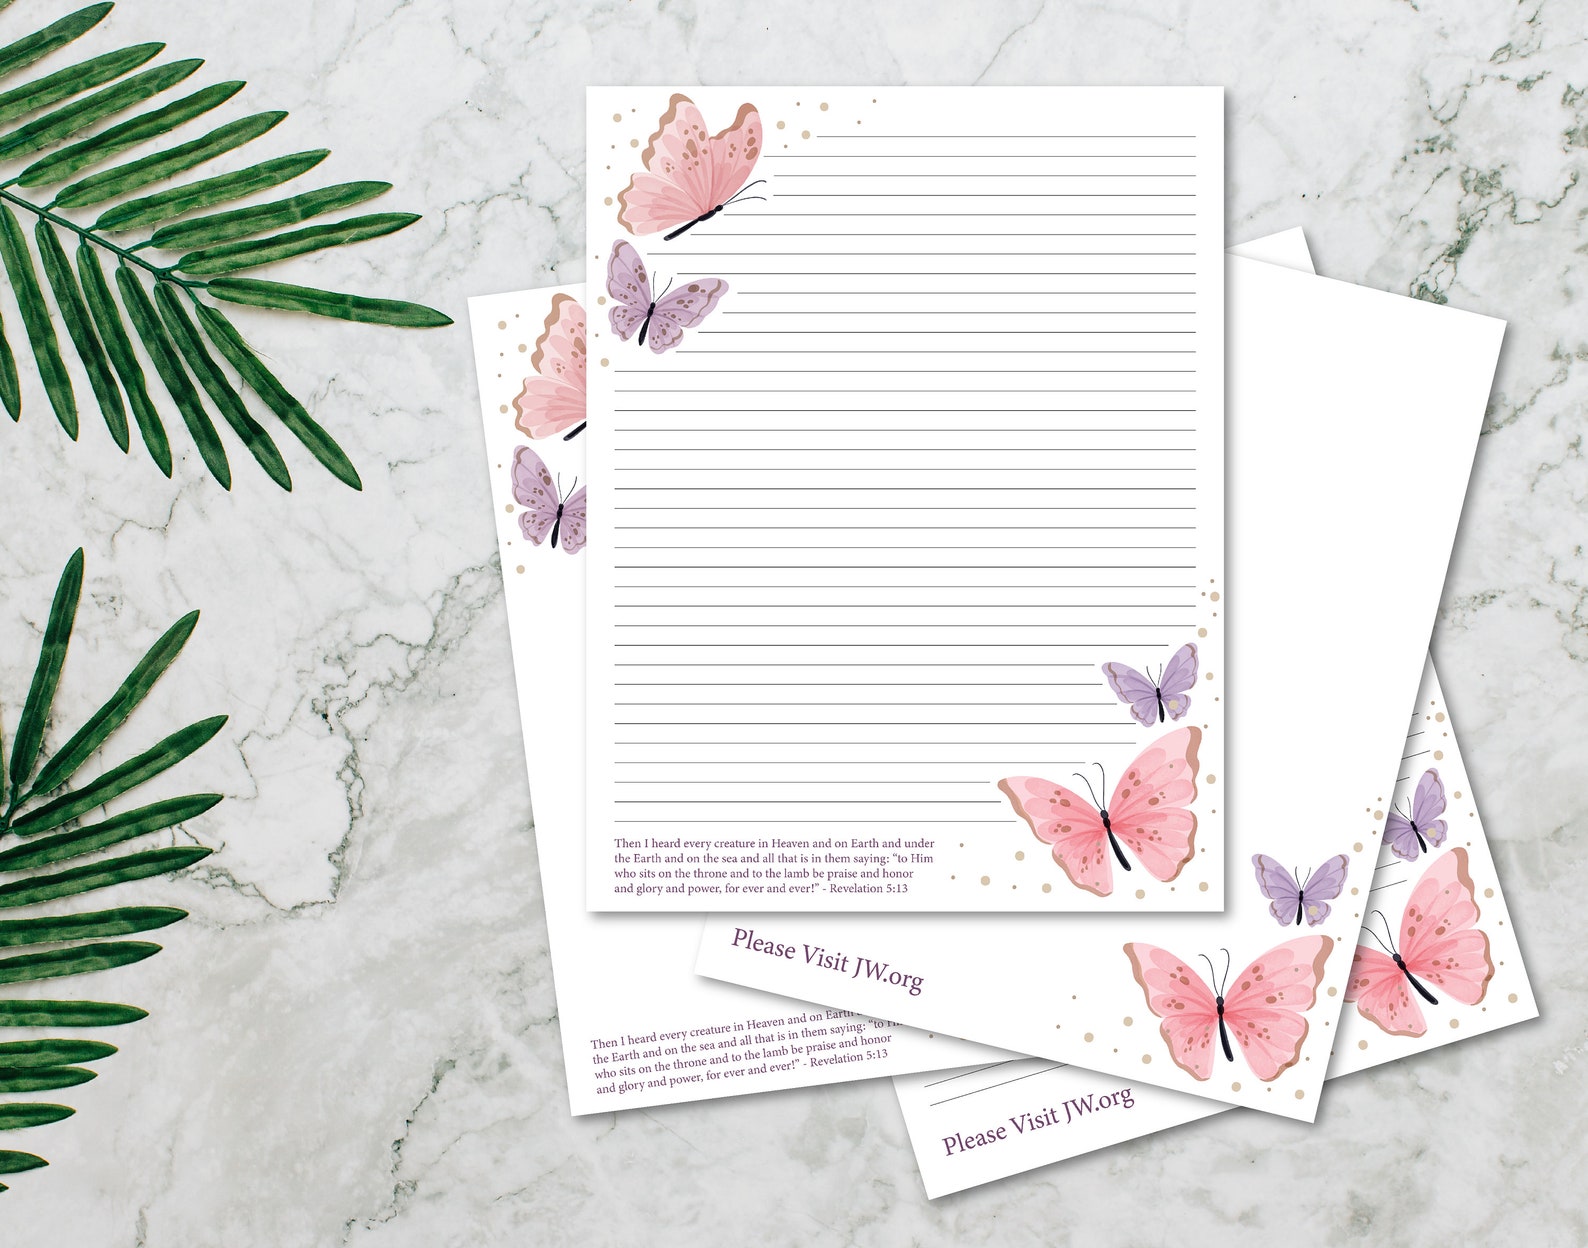 jw-letter-writing-template-pdf-printable-stationery-jw-paper-etsy